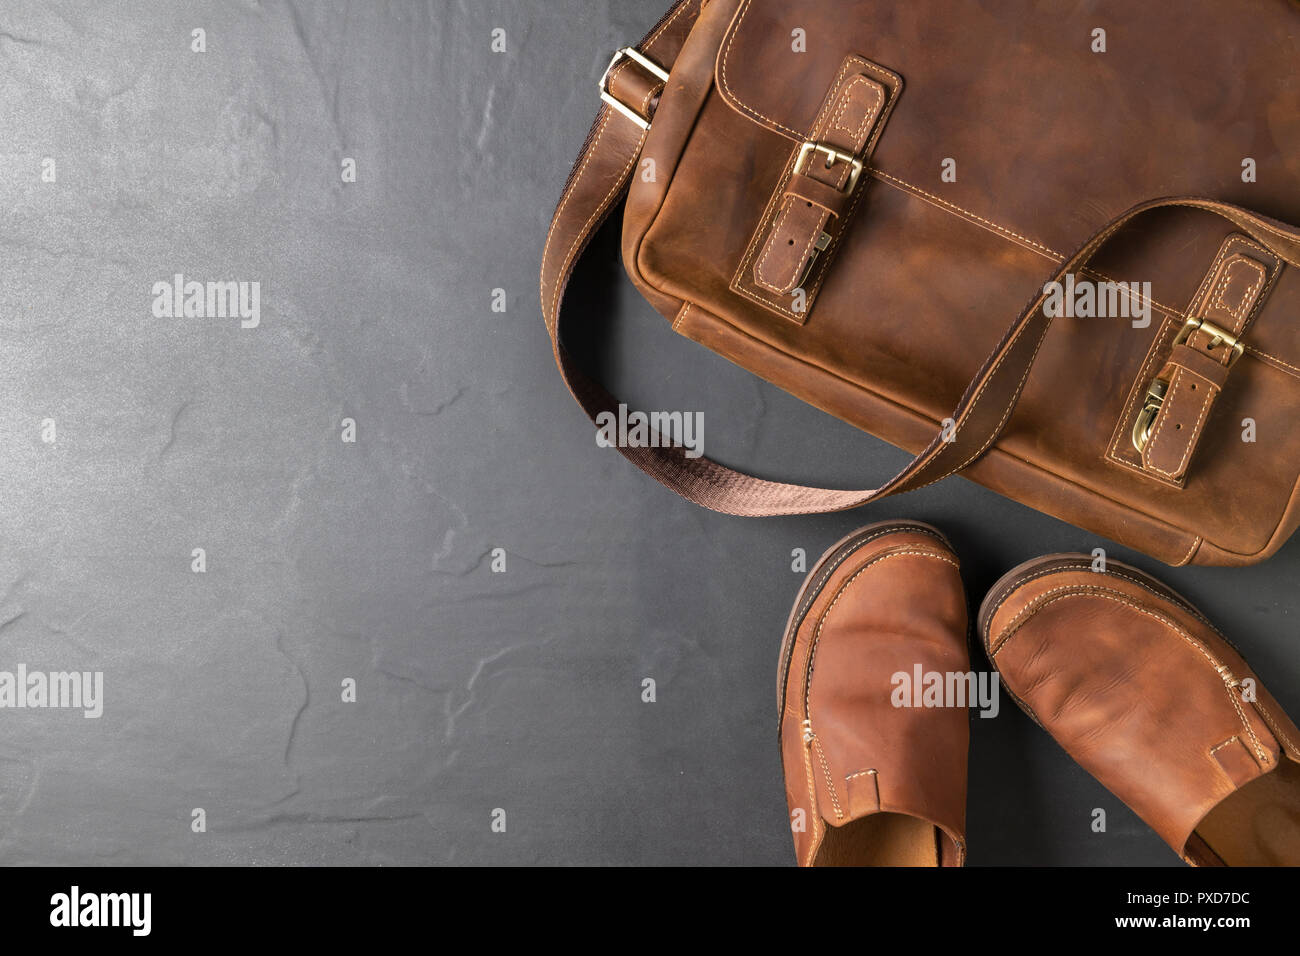 Leather Vintage bag and leatrher Casual Shoes on black stone background with copy space, accessories costume concept Stock Photo